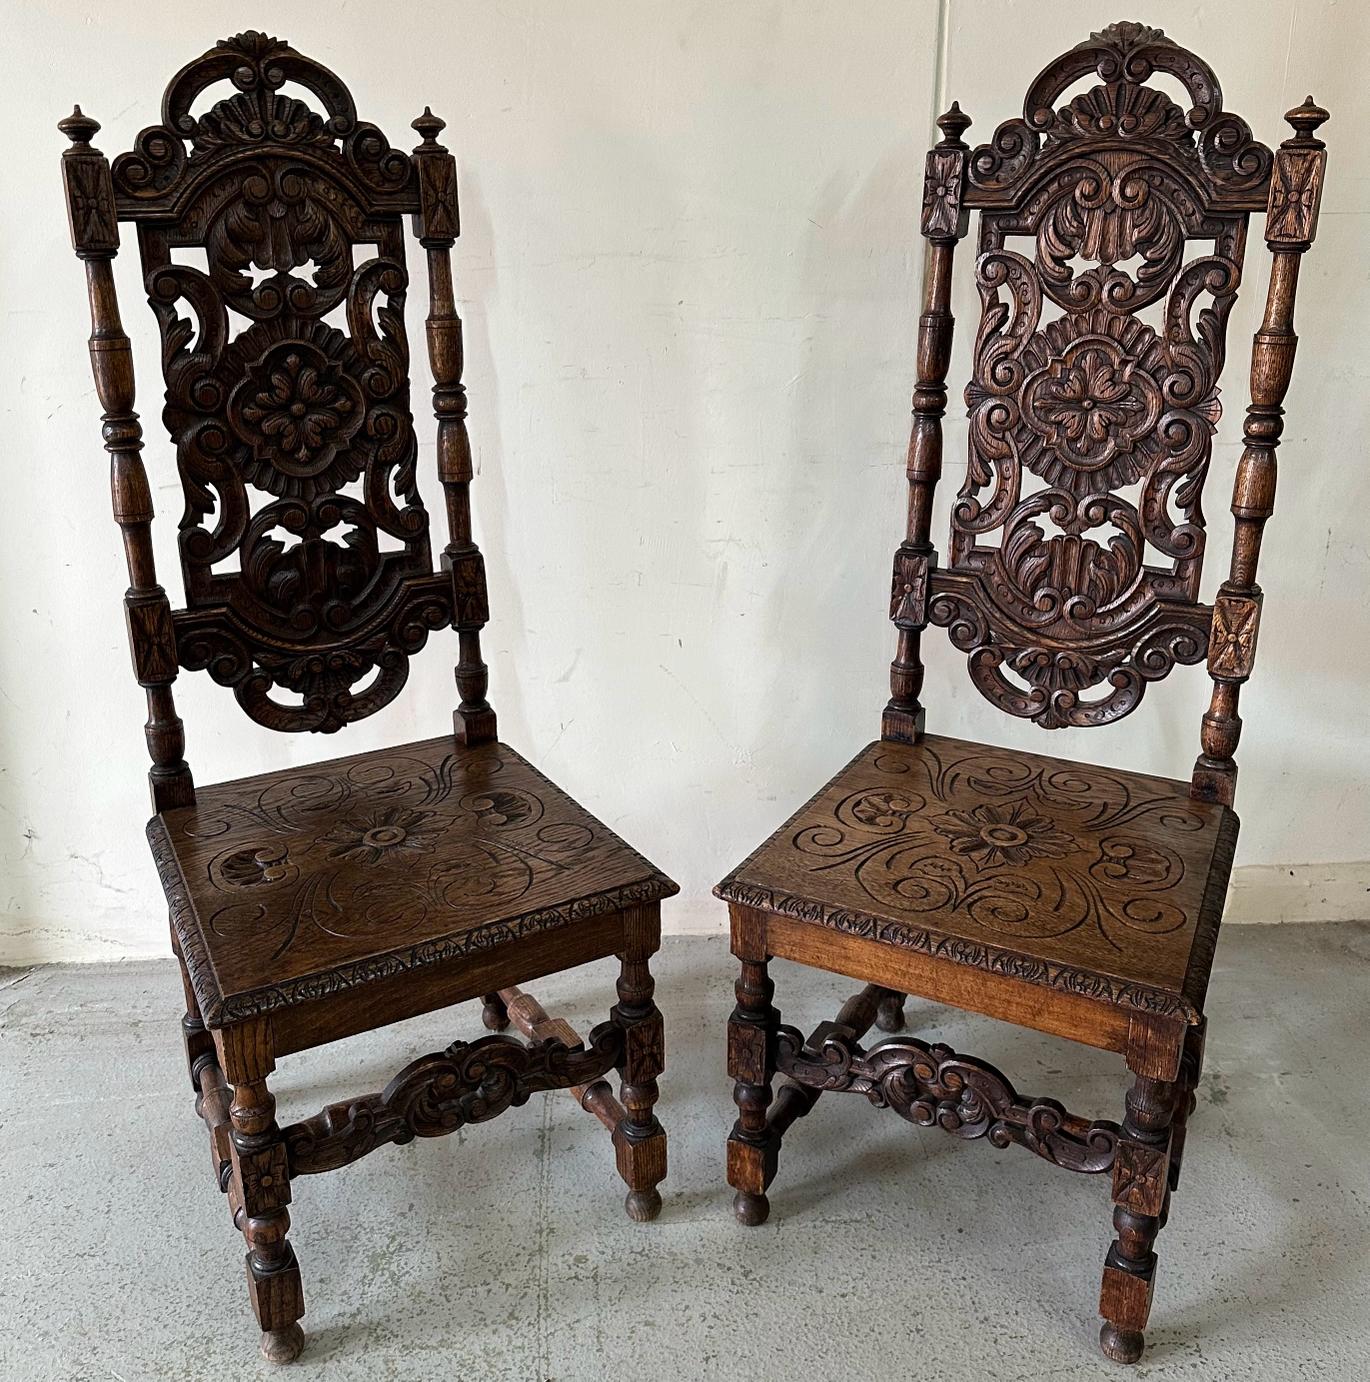 A pair of Victorian style oak hall chairs with carved seats and back, turned supports ending in